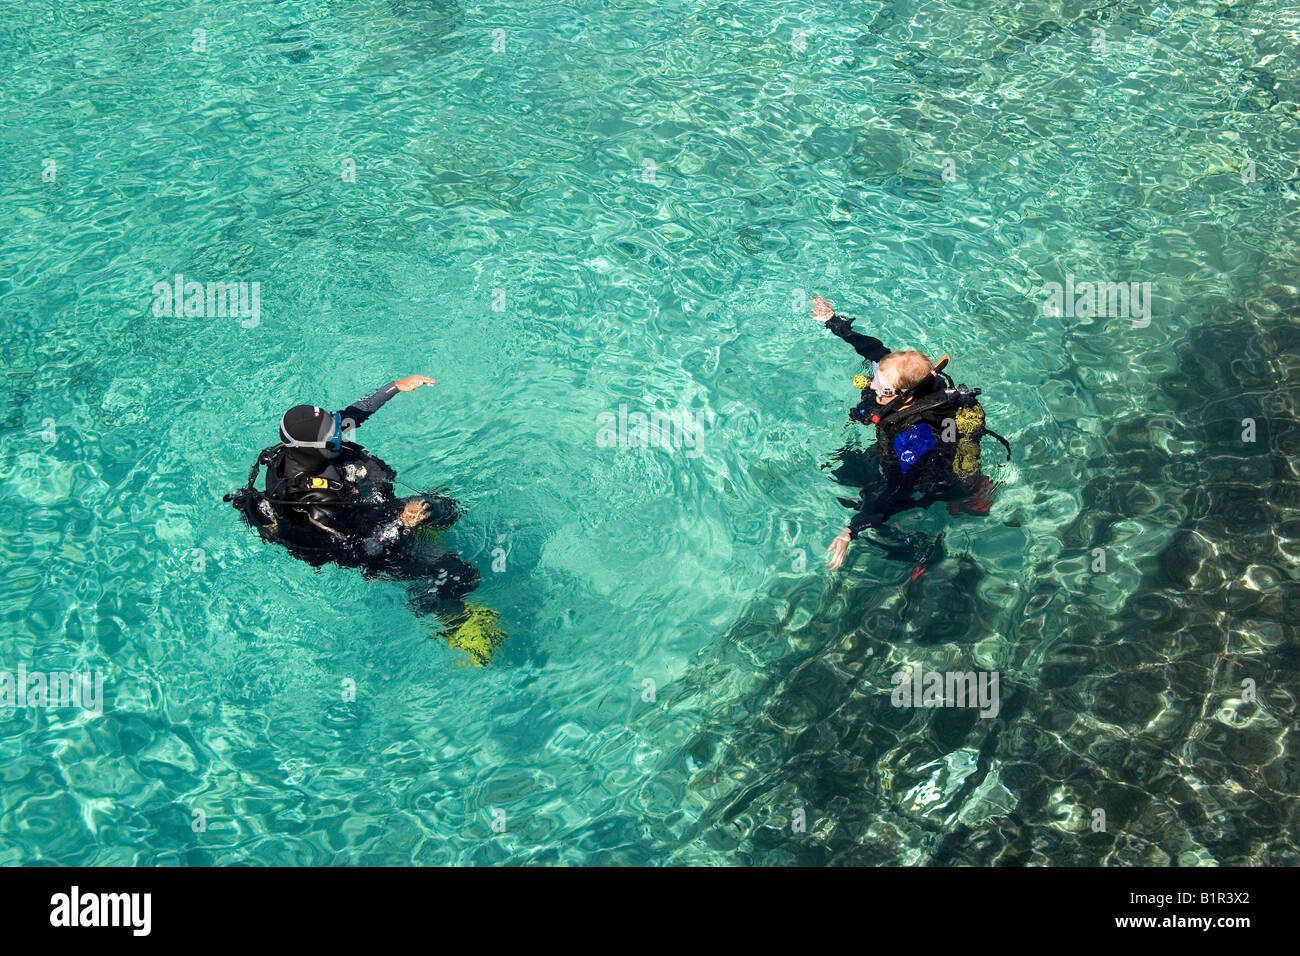 High angle view of two scuba divers in the water, Hondoq Bay, Gozo, Malta Stock Photo